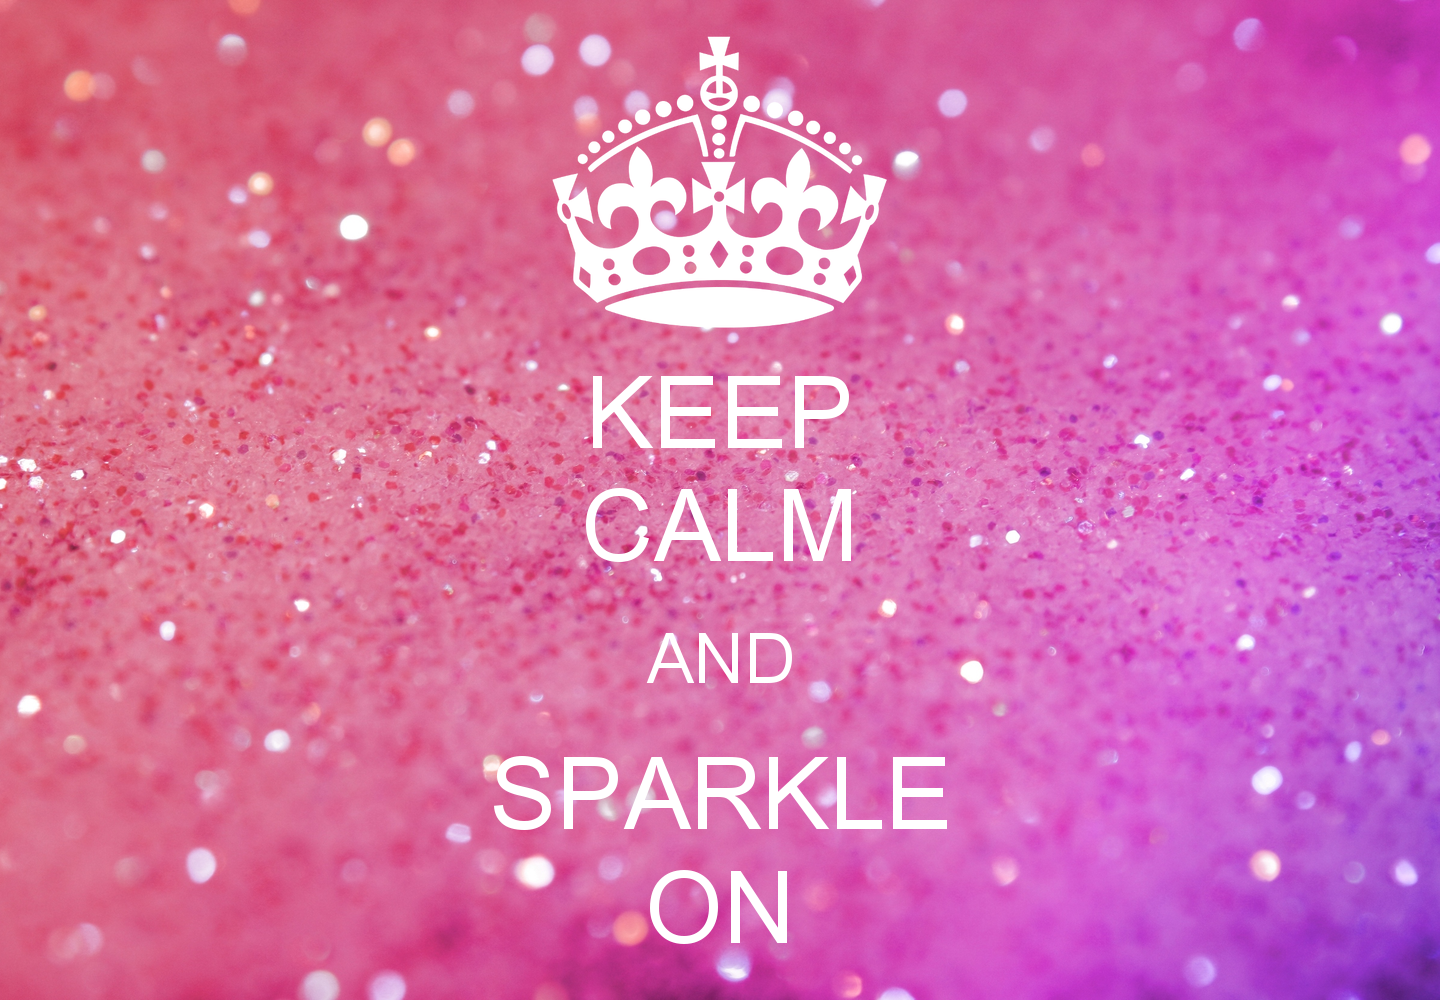 KEEP CALM AND SPARKLE ON   KEEP CALM AND CARRY ON Image Generator